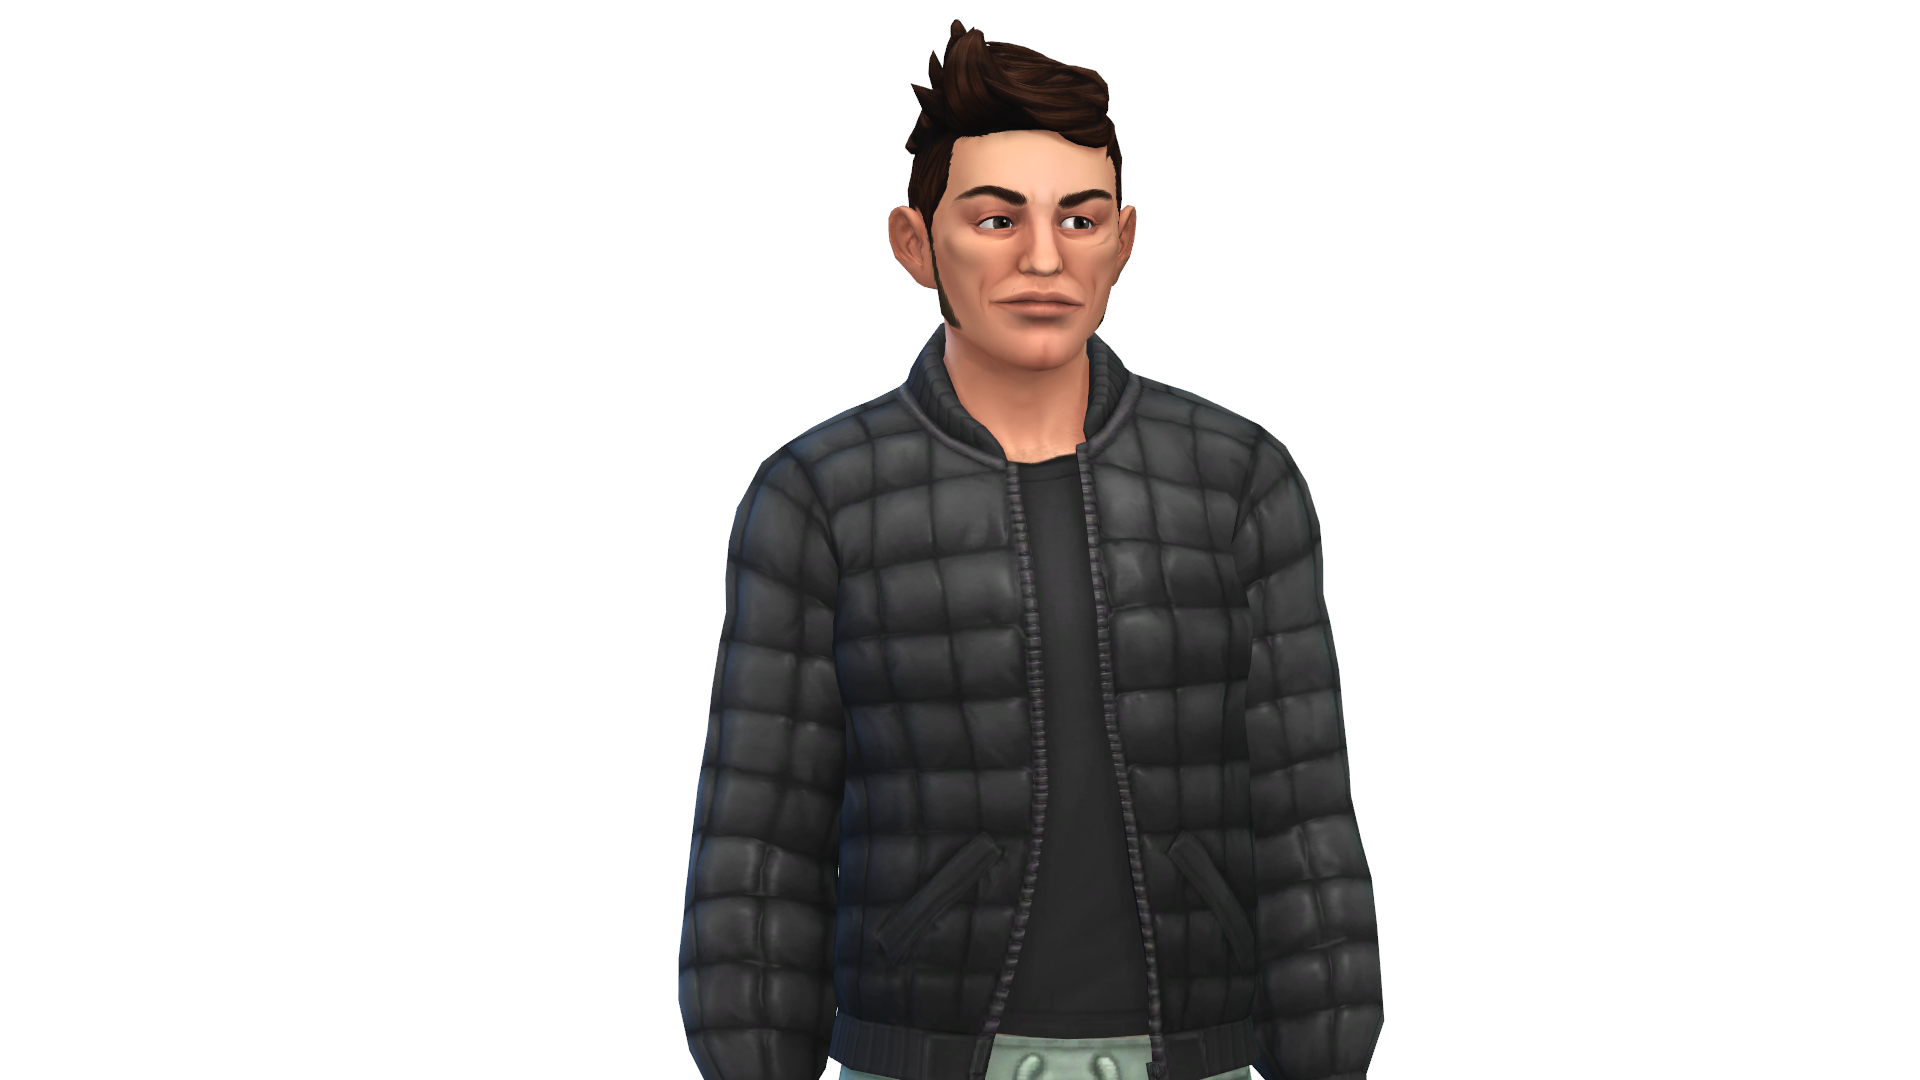 Share Your Male Sims! - Page 303 - The Sims 4 General Discussion ...